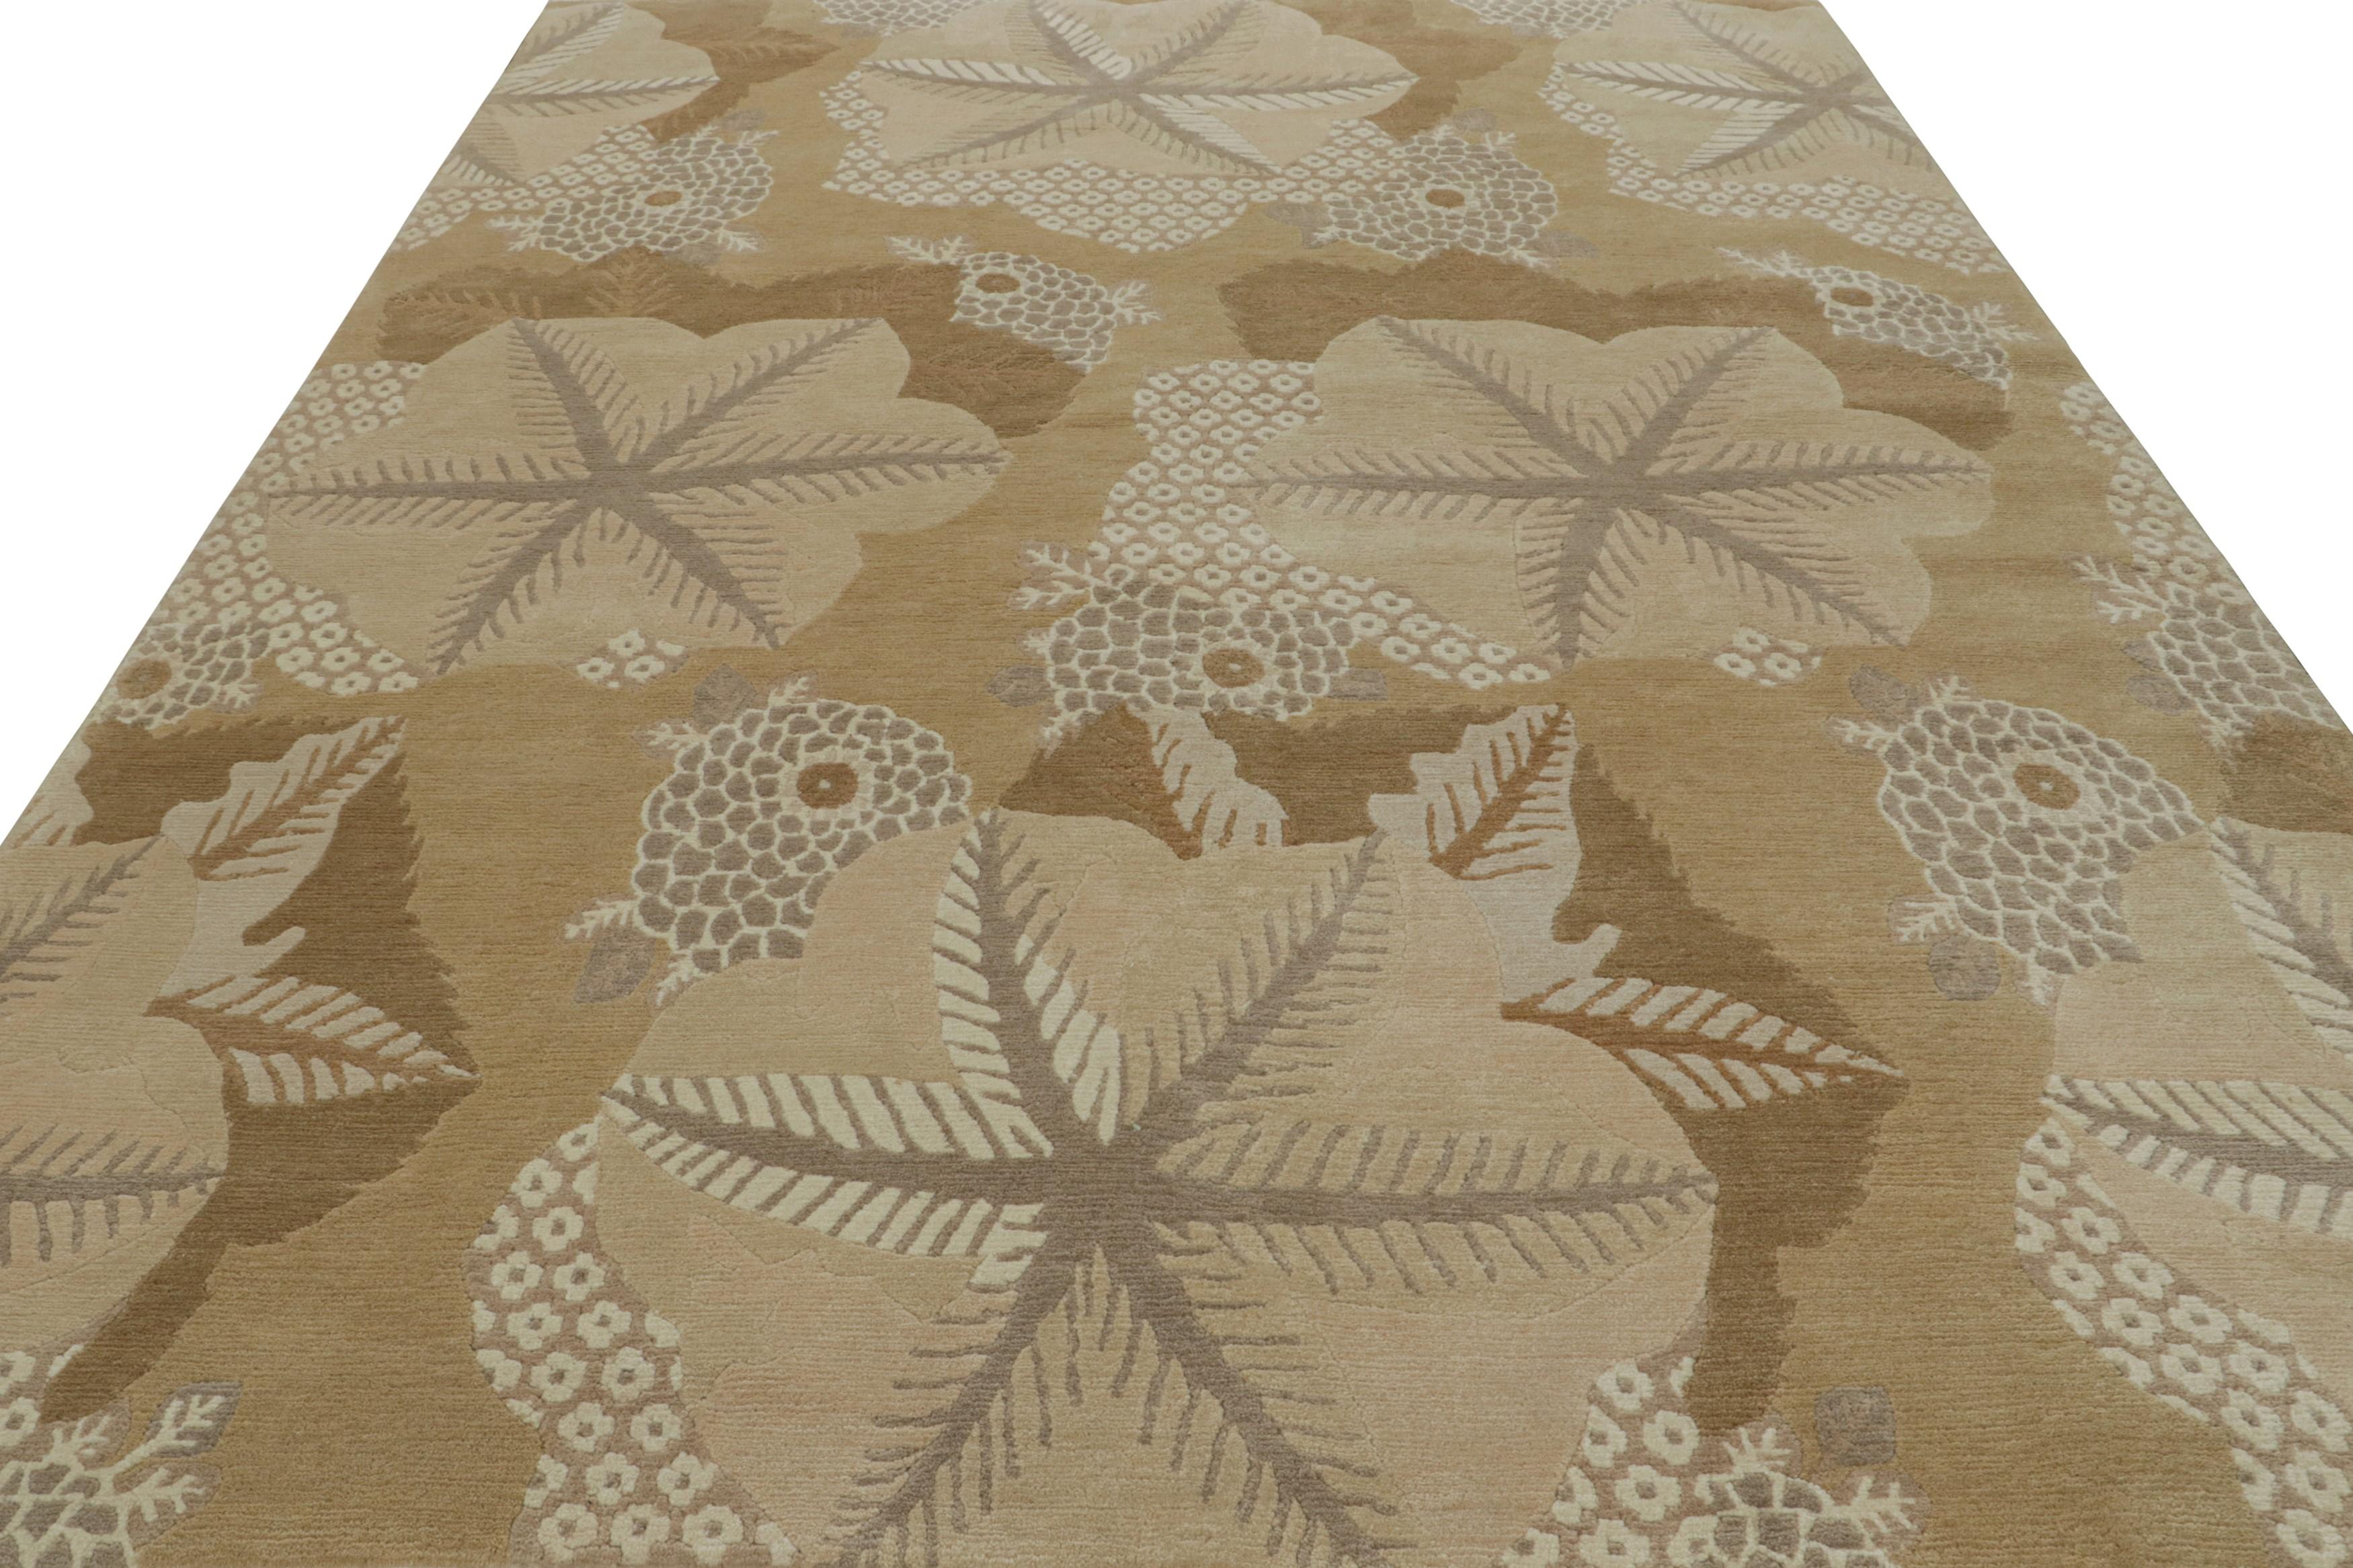 Nepalese Rug & Kilim’s “Clouds” Modern Rug Design in Beige-brown with Floral Medallions For Sale